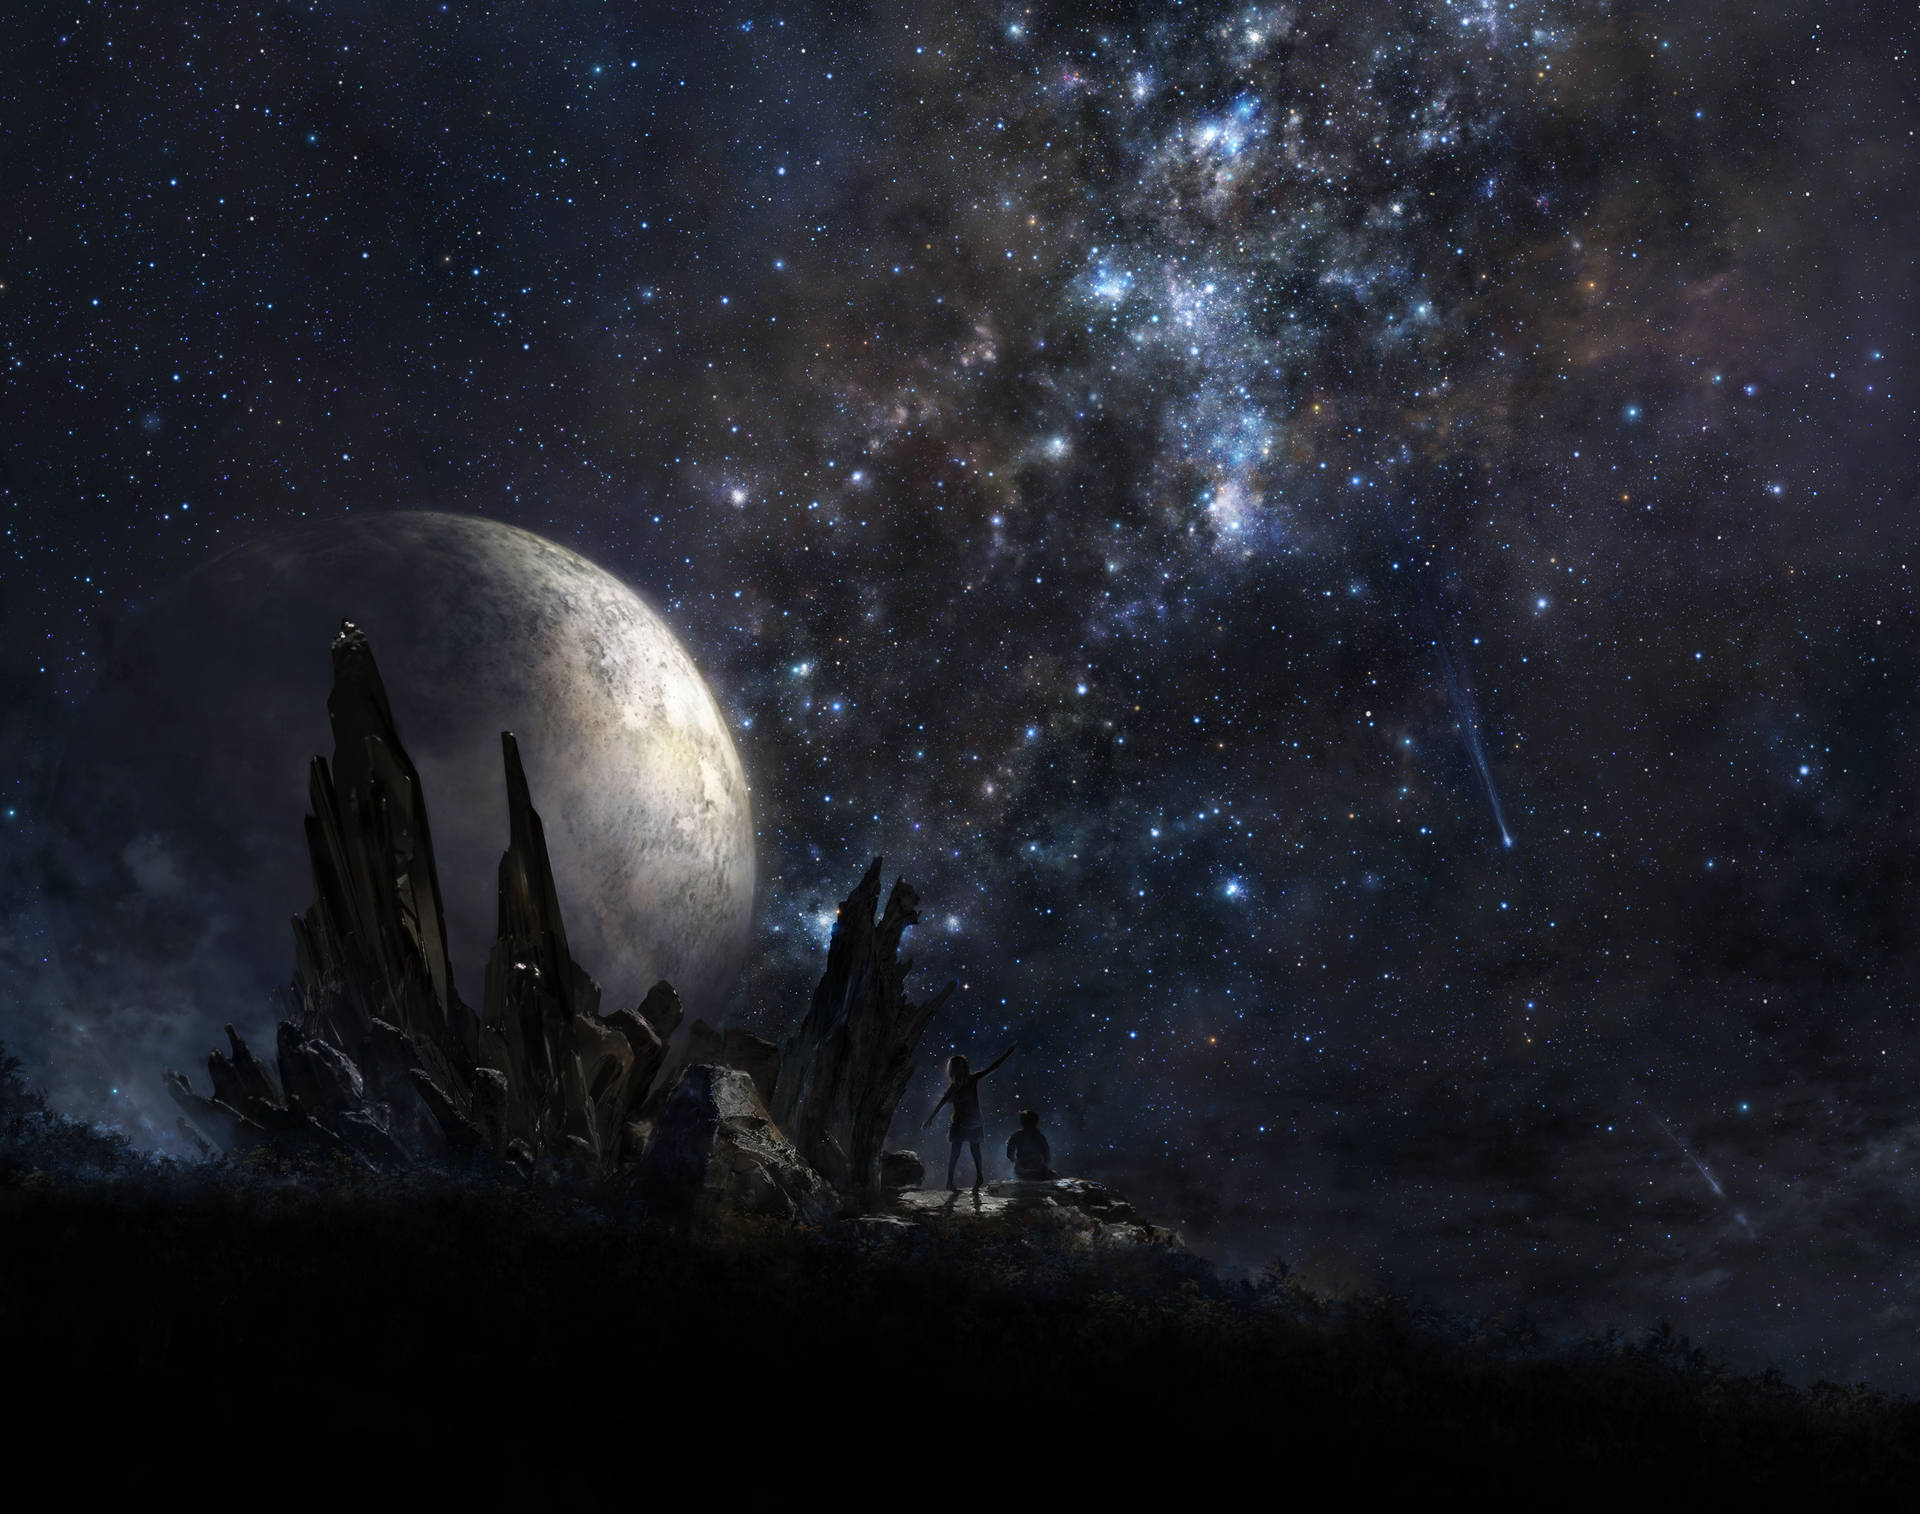 Take time to admire the beauty of the night sky Wallpaper